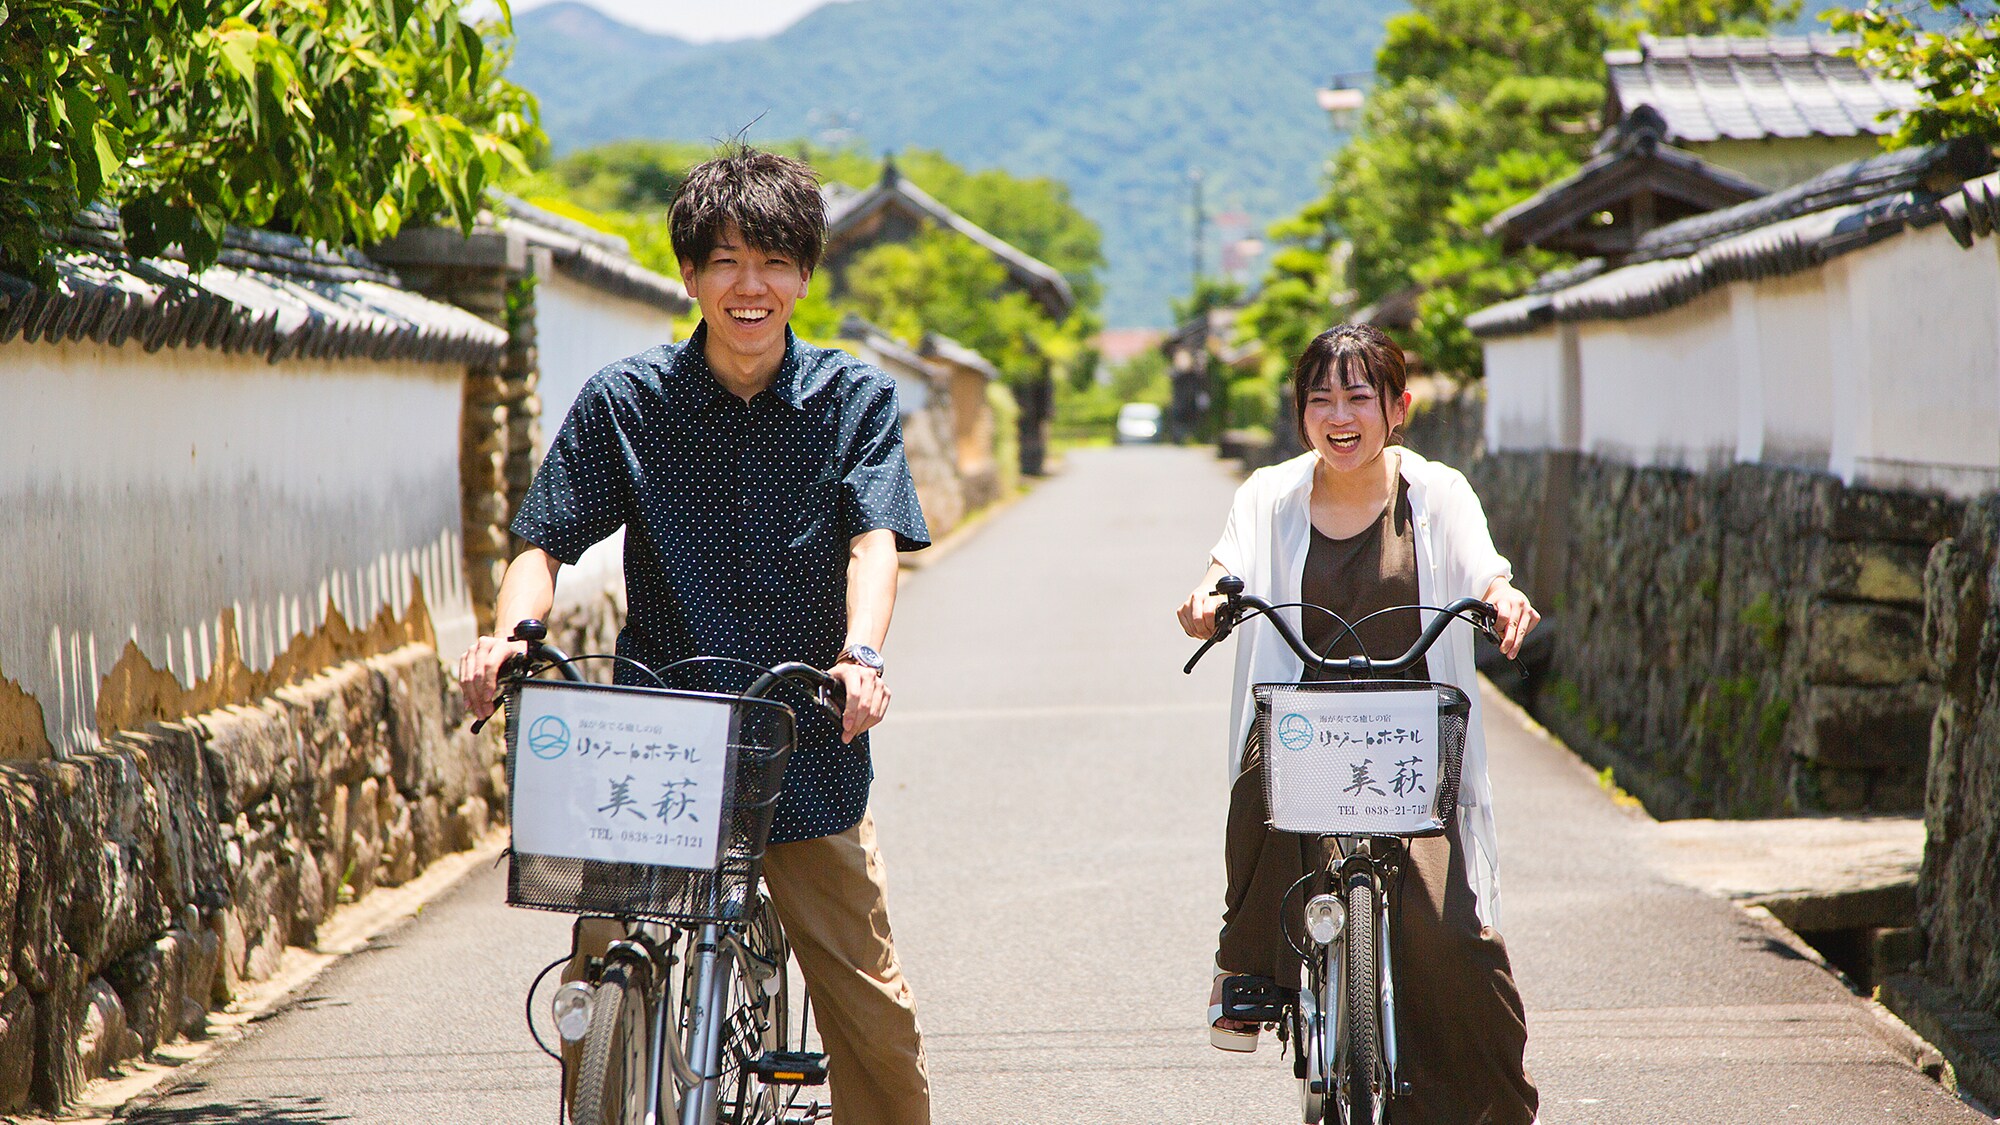 Take a walk through the castle town "Hagi" by bicycle ♪ The exhilarating feeling of running in the charming cityscape ♪